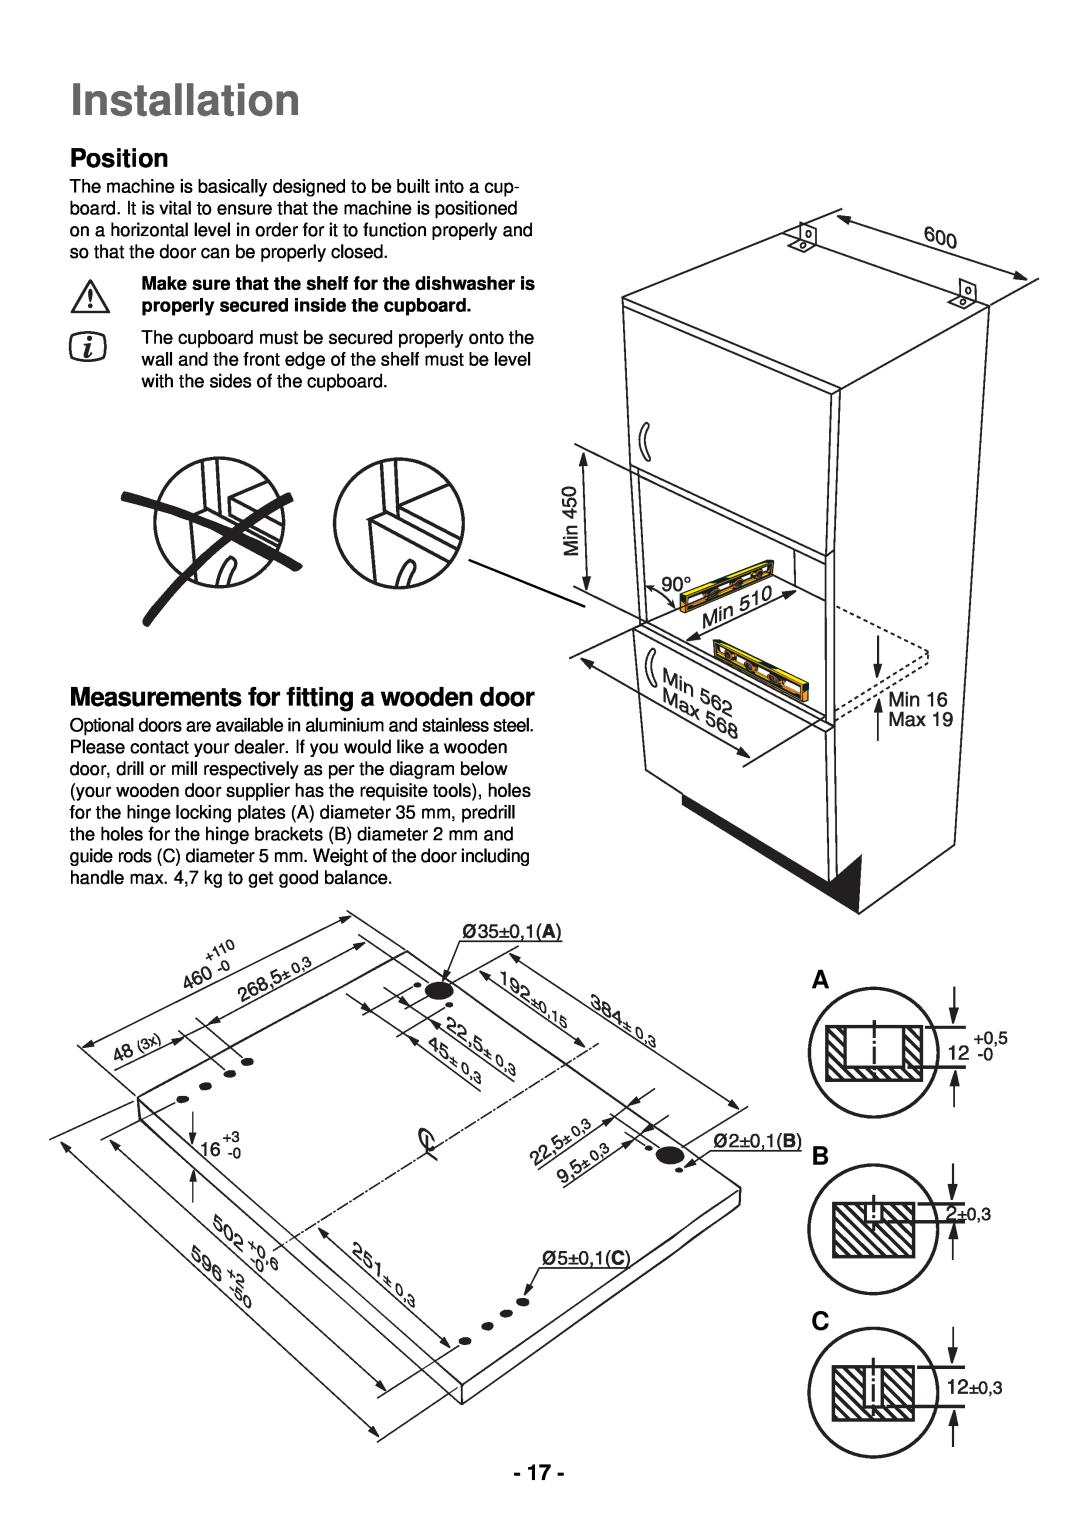 Electrolux ESL 2435 manual Installation, Position, Measurements for ﬁtting a wooden door, A B C 